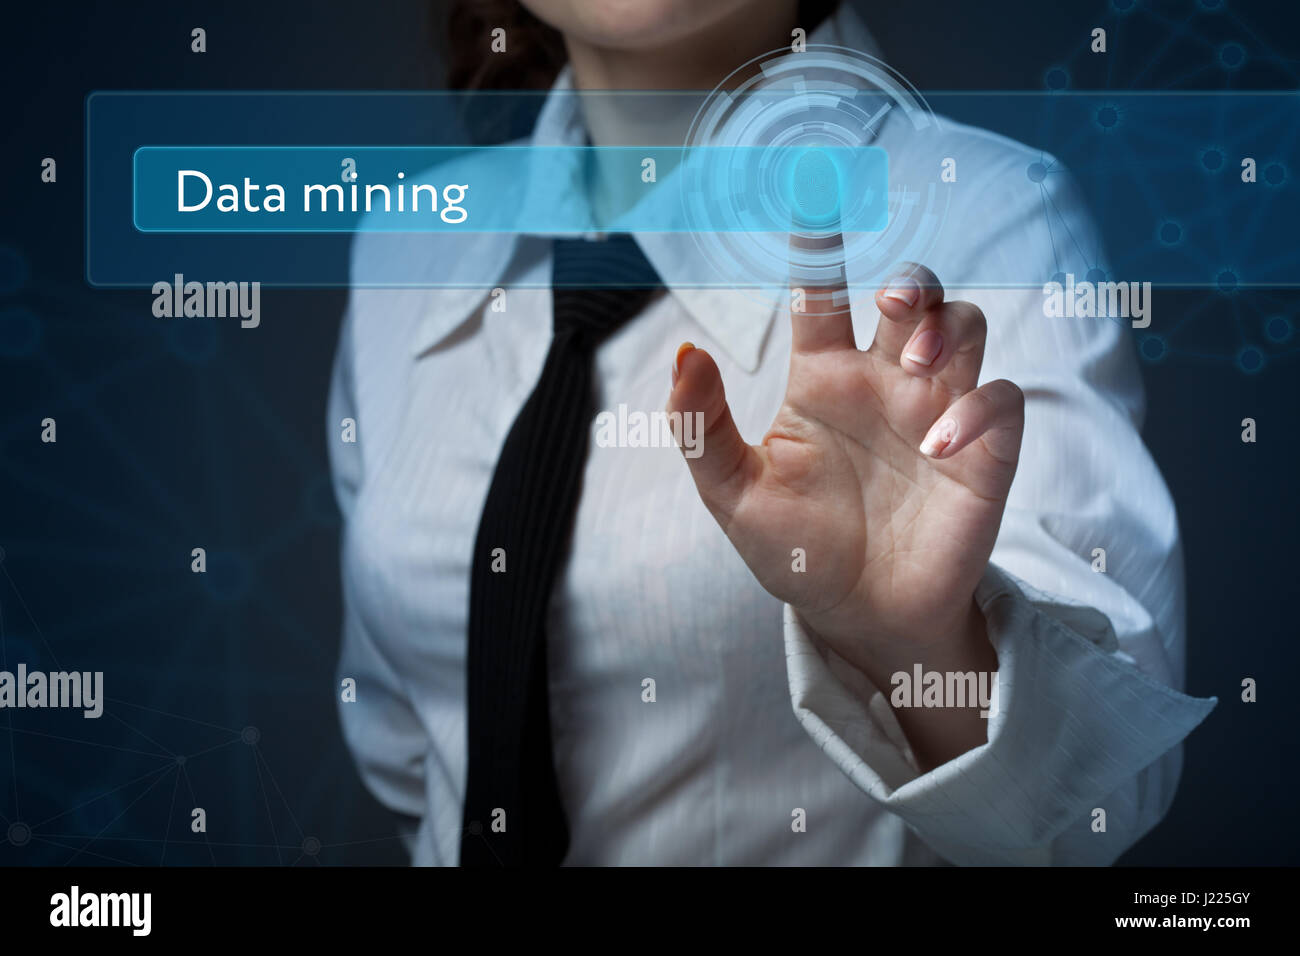 Business, technology, internet and networking concept. Business woman presses a button on the virtual screen: Data mining Stock Photo